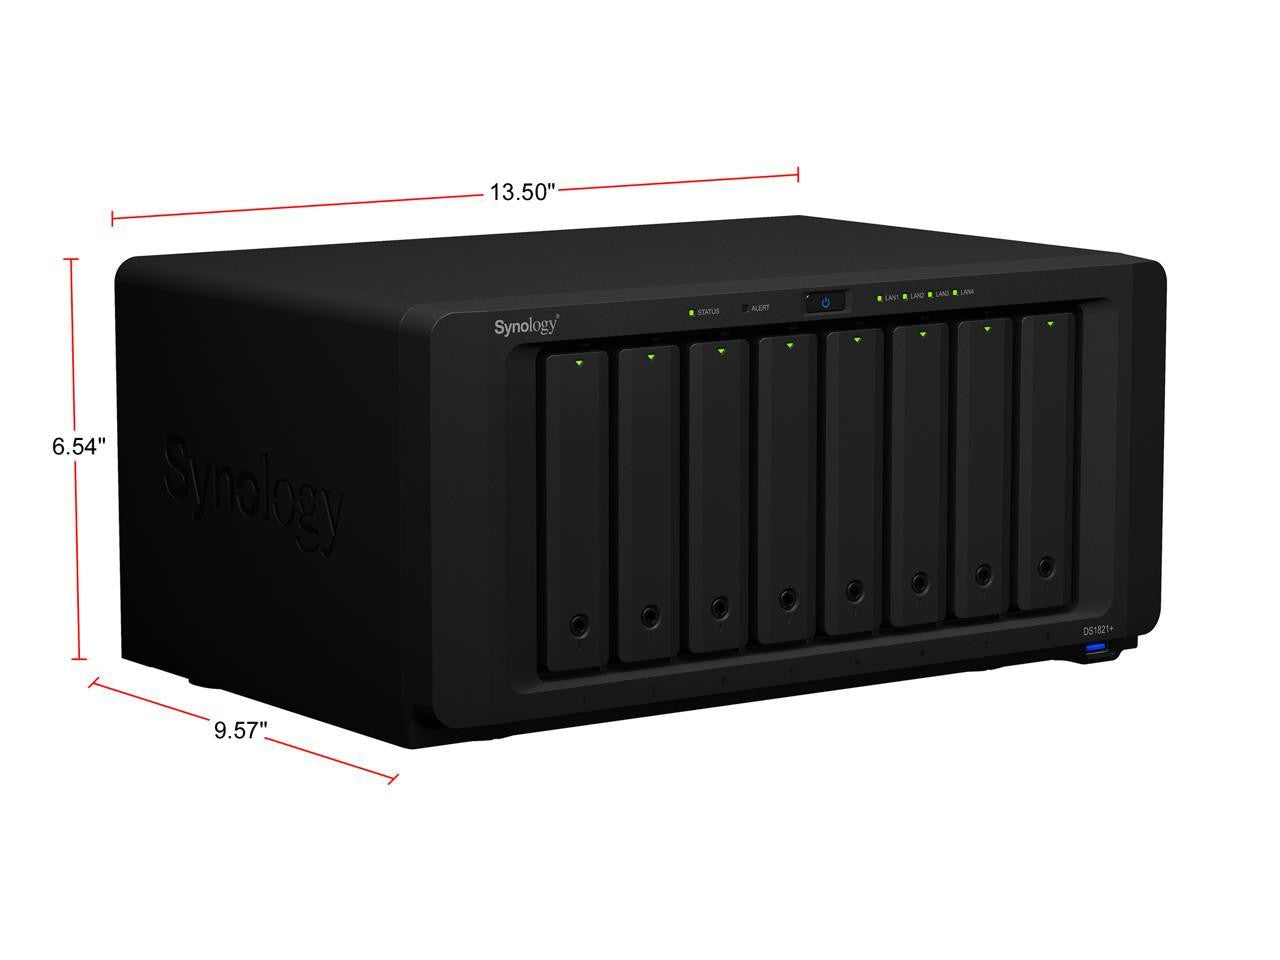 Synology DS1821+ 8-BAY DiskStation with 4GB Synology RAM and 48TB (8x6TB) Western Digital RED PLUS Drives Fully Assembled and Tested